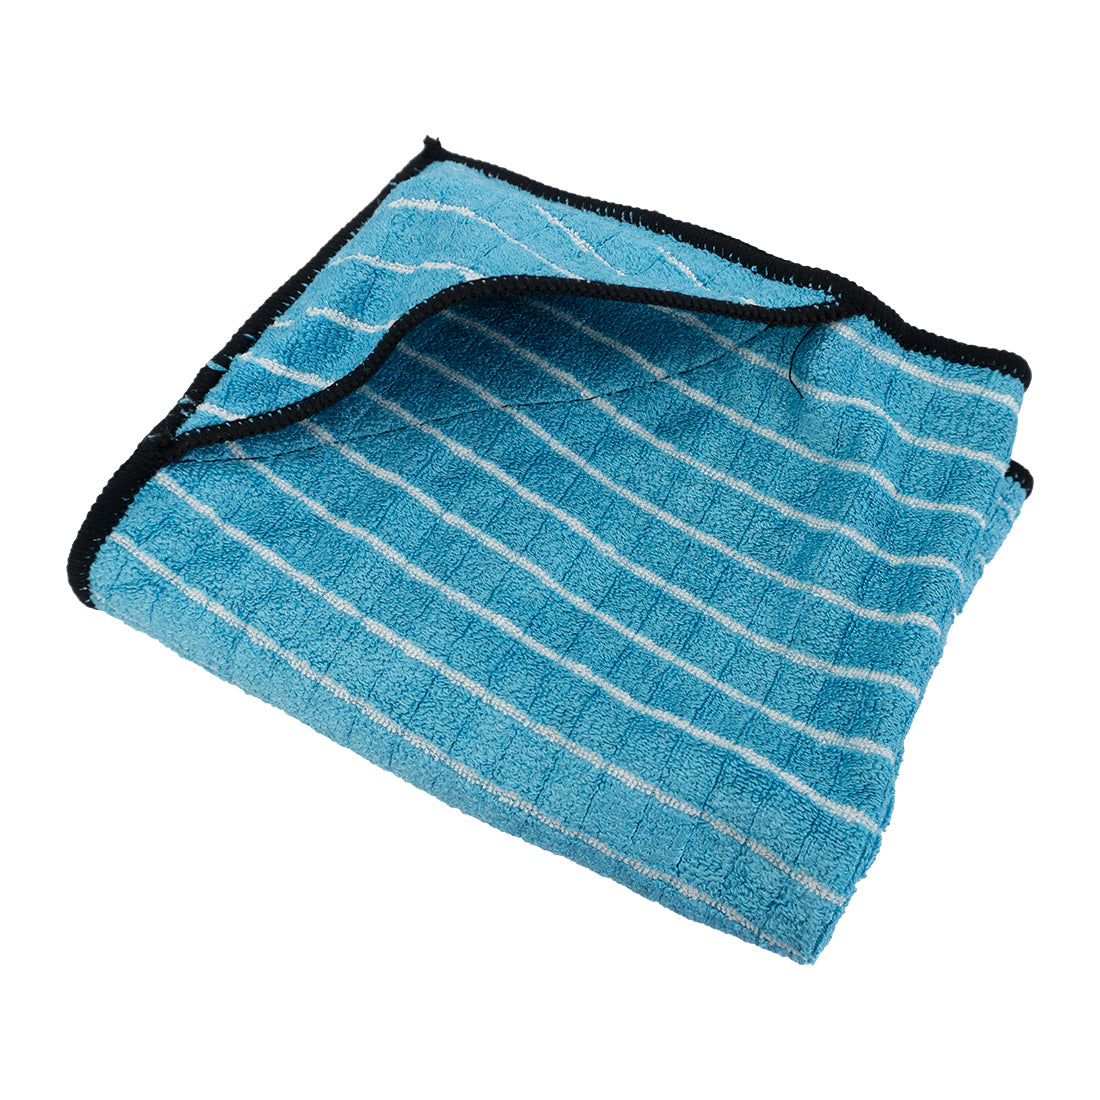 HIGHLY ABSORBENT Kitchen Dish Towels, Microfiber and Bamboo REVIEW 